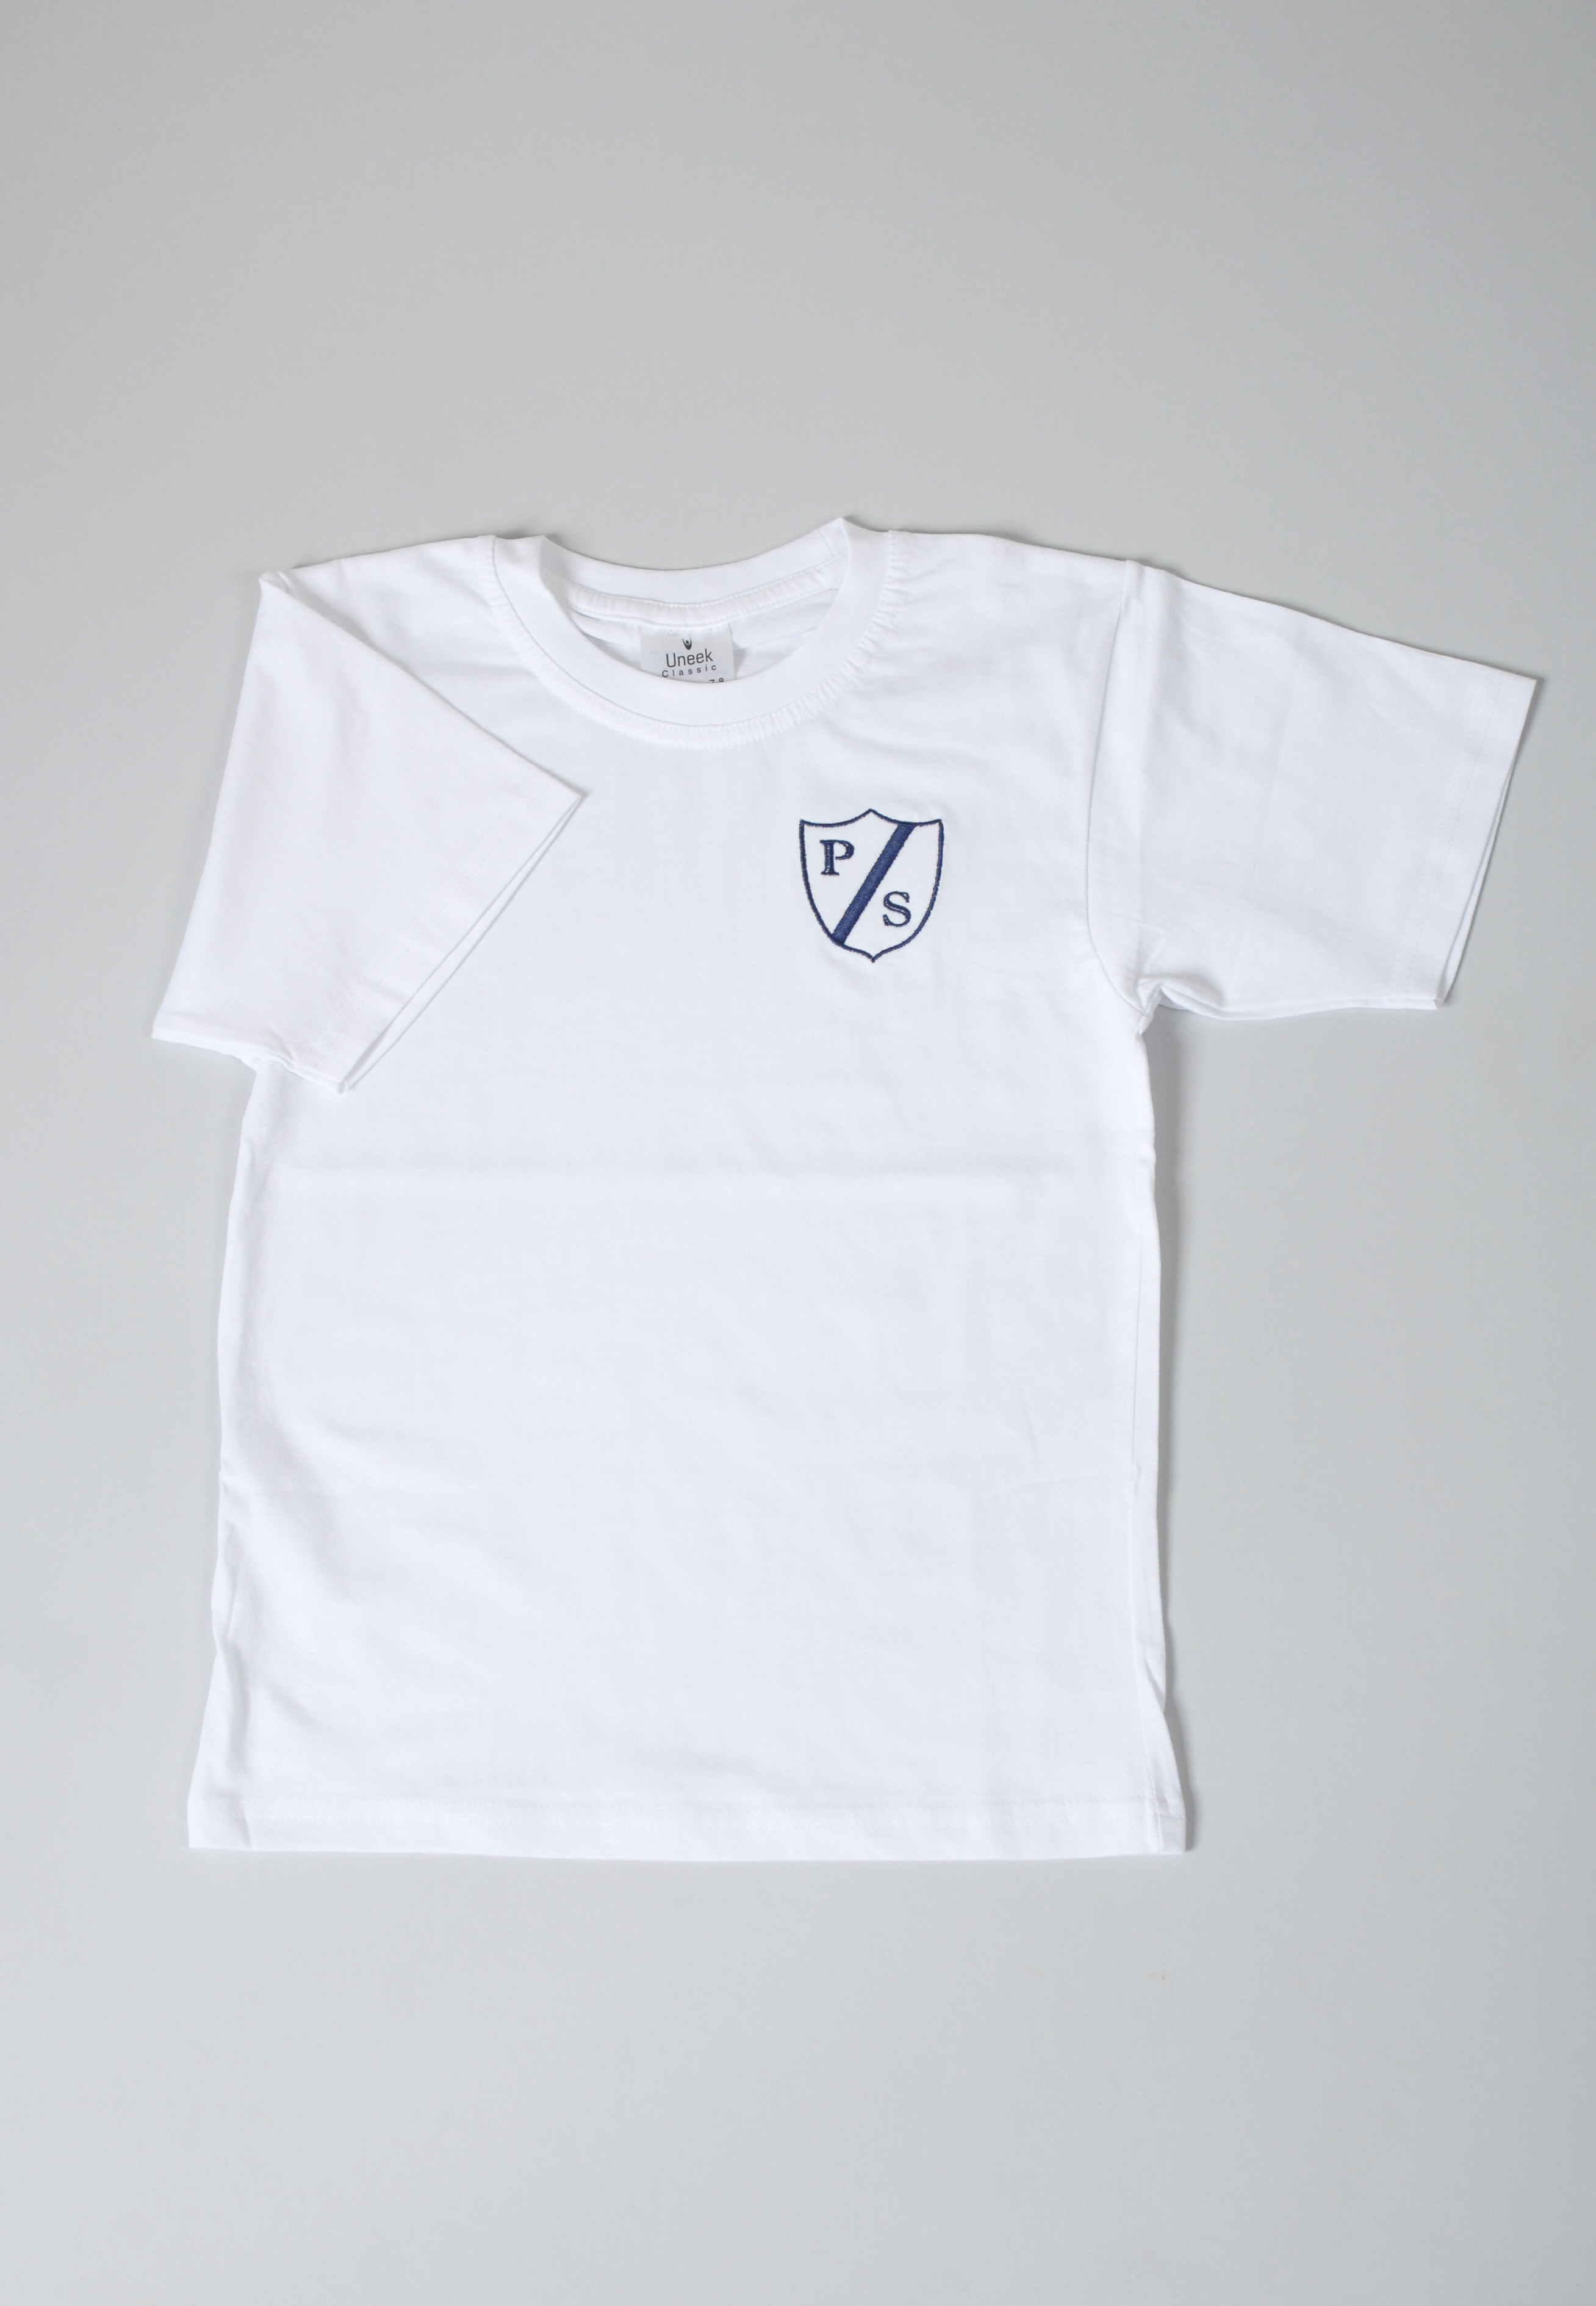 White T Shirt with School Logo - Age 11-13